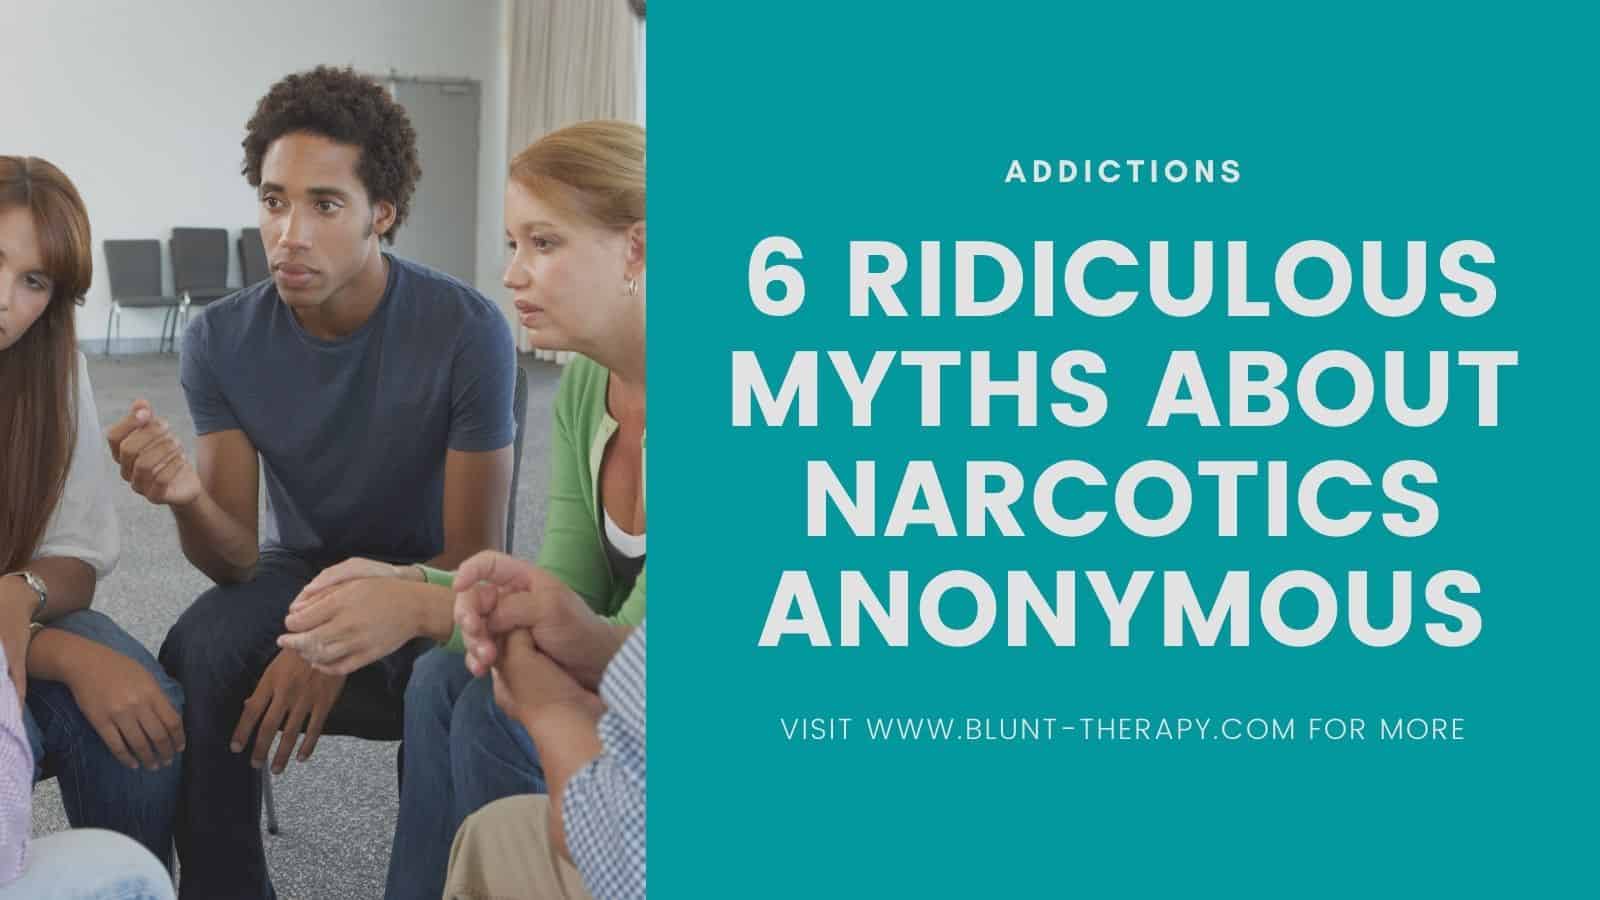 6 Ridiculous Myths About Narcotics Anonymous